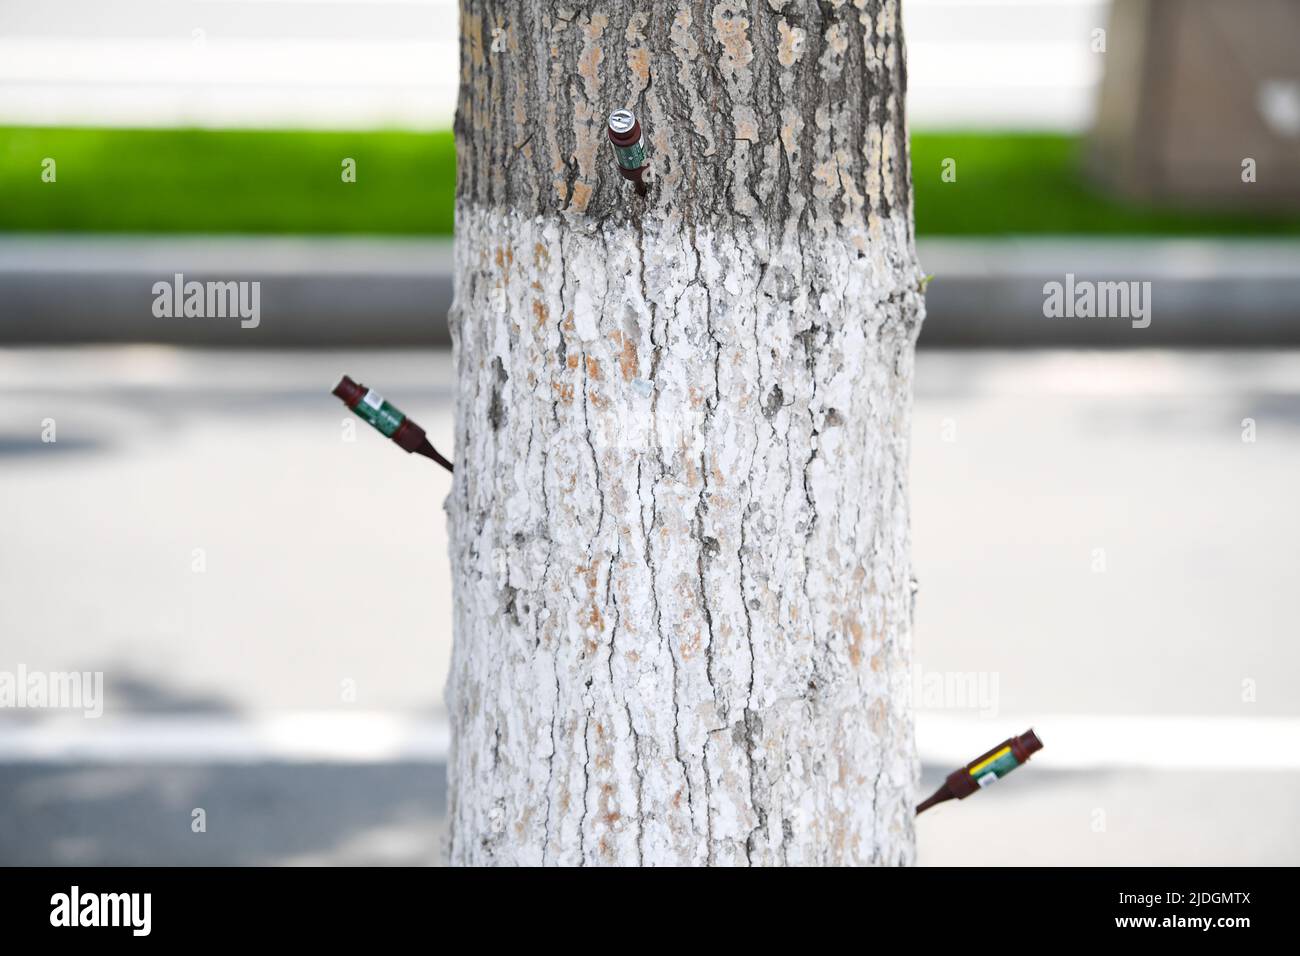 CHANGCHUN, CHINA - JUNE 21, 2022 - Trees on both sides of renmin Avenue in Nanguan district of Changchun city are injected with 'contraceptive injecti Stock Photo